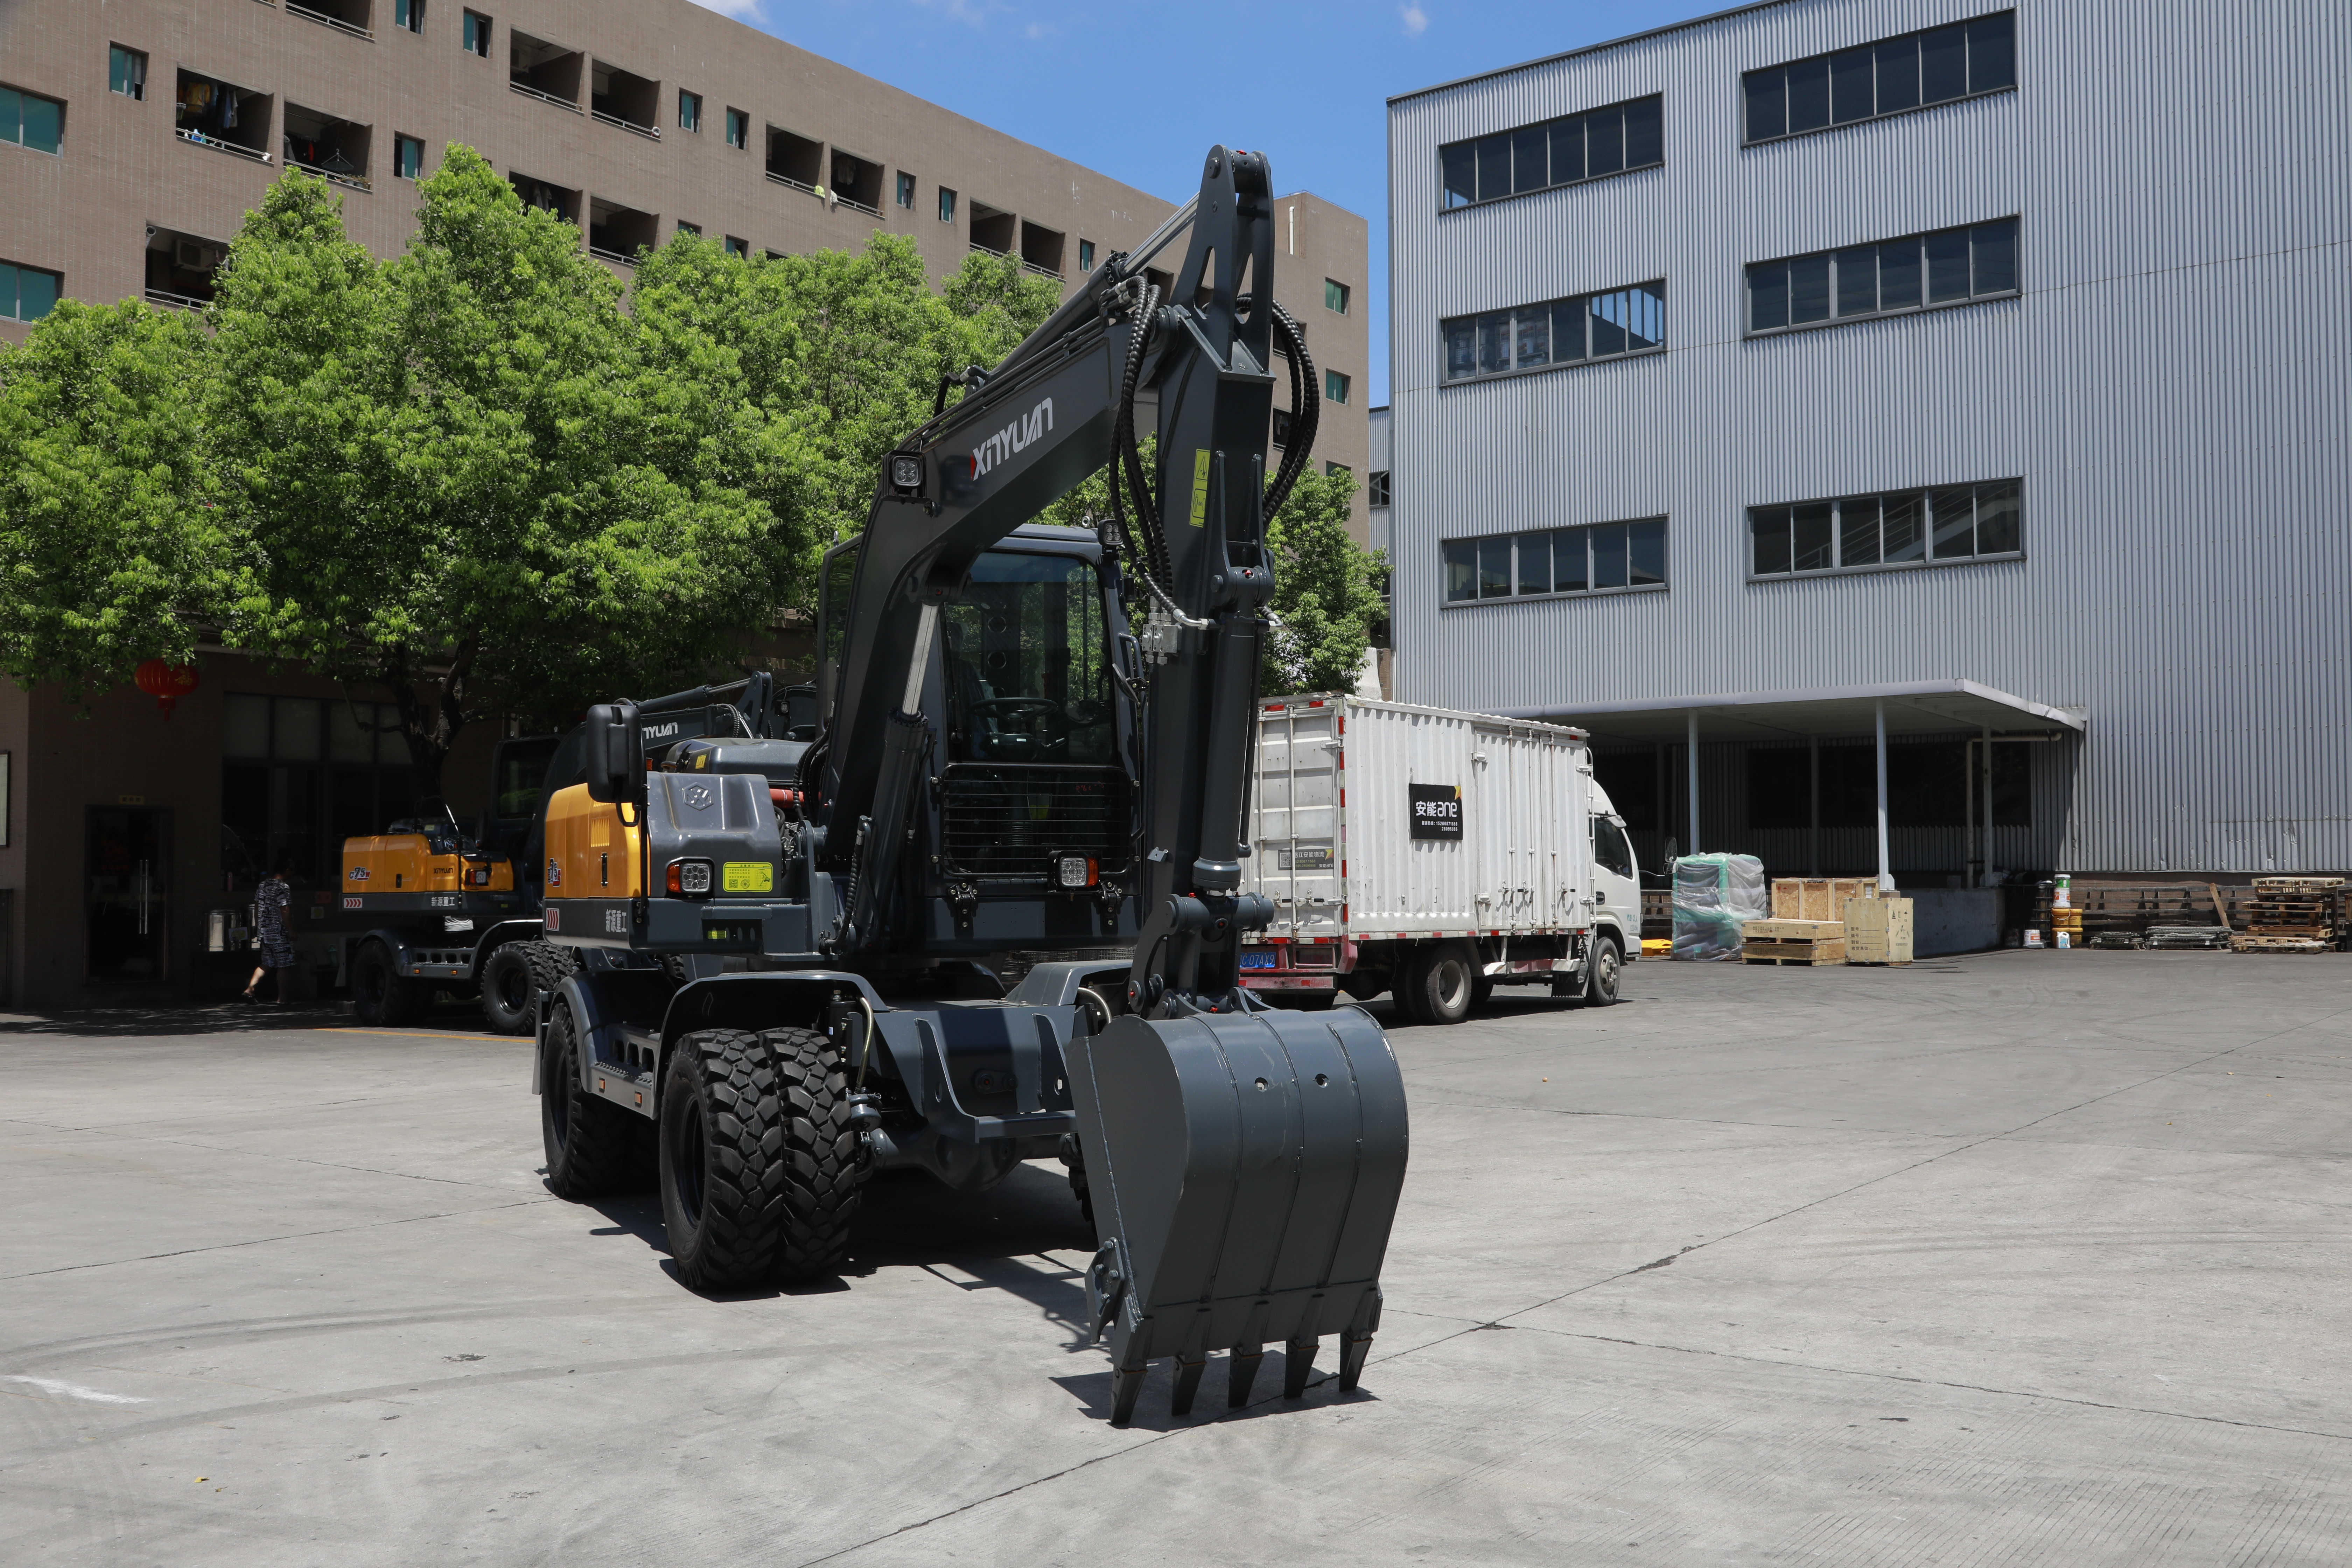 XYB75SWXTJ 7ton Small Wheel Excavators Construction Equipment with Clamp Pipes